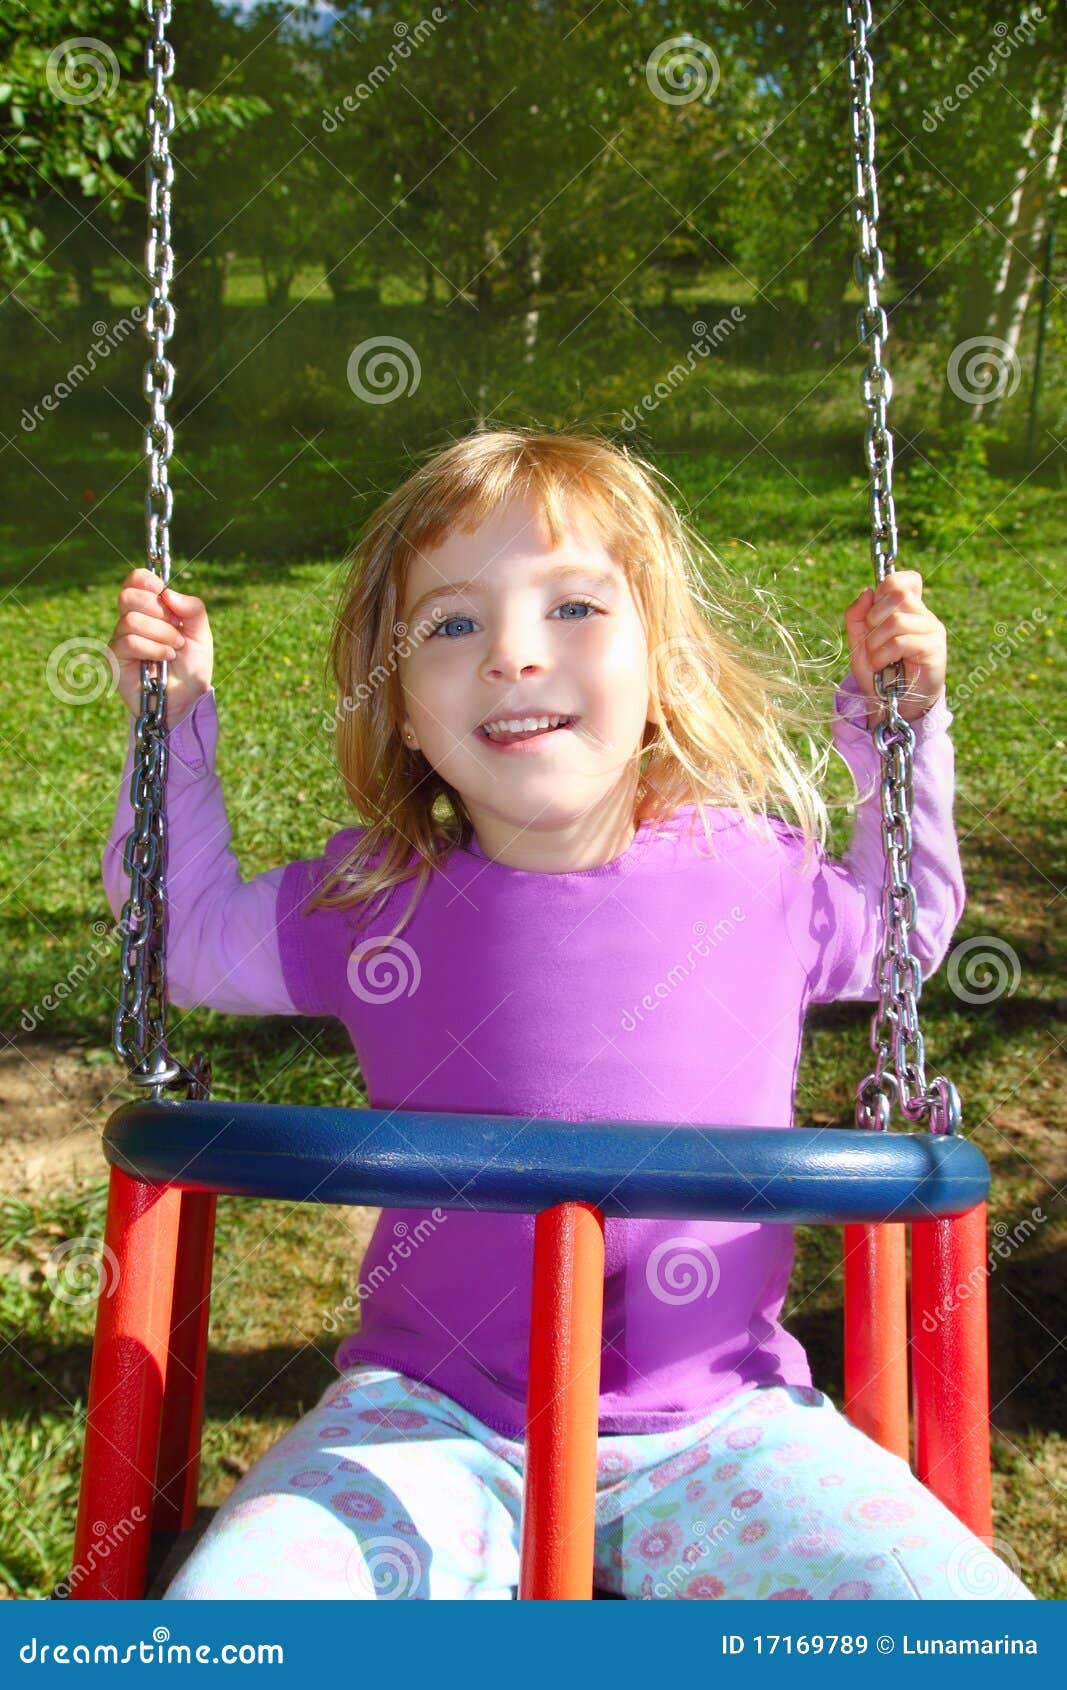 Girl Swinging On Swing Happy In Meadow Grass Park Stock Image Image Of Park Happy 17169789